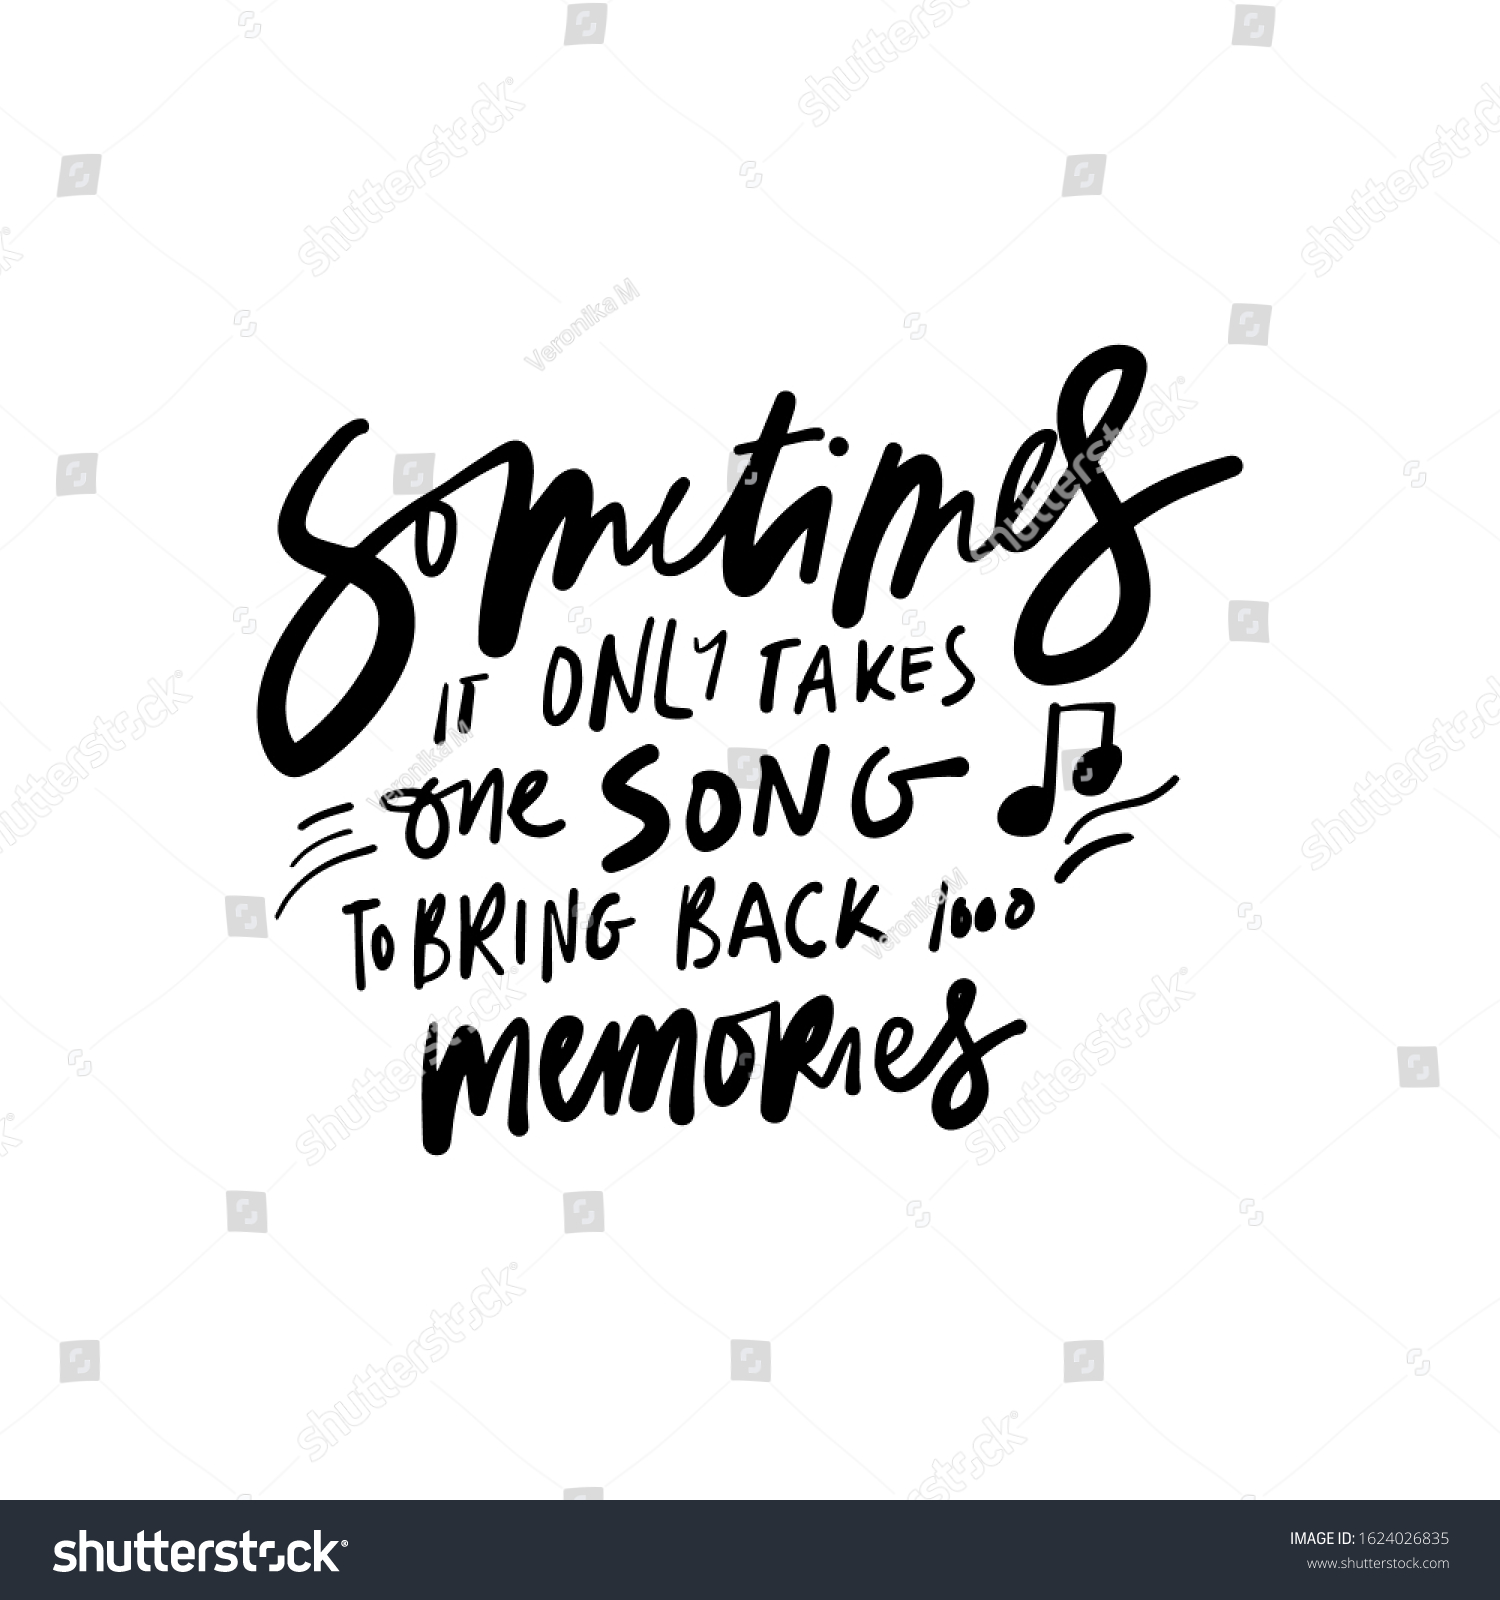 What Is The Song Id For Memories